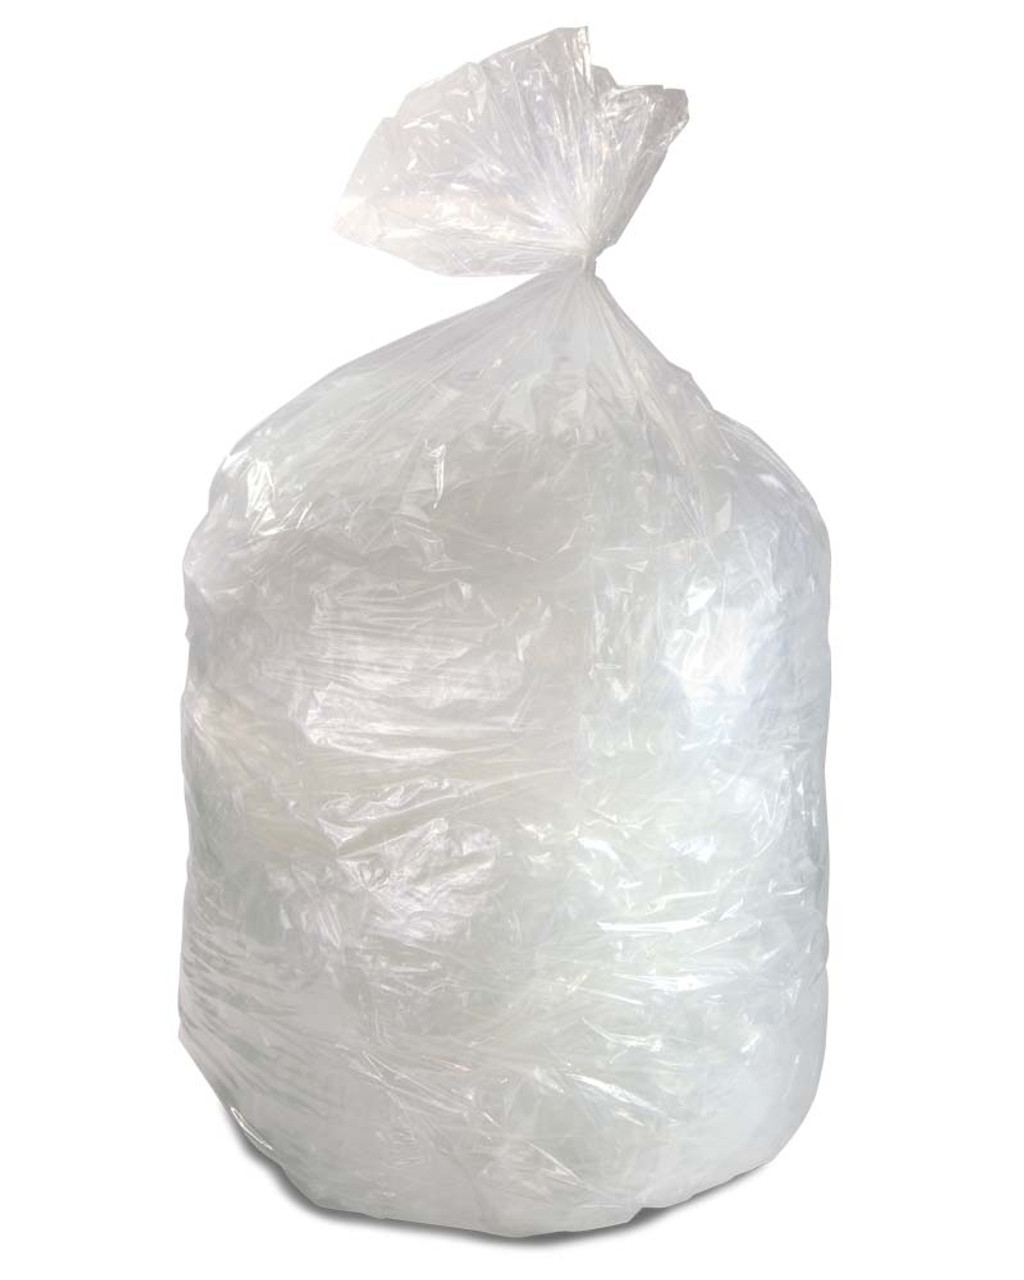 Black Plain Disposable Perforated Garbage Bags, Packaging Type: Packet